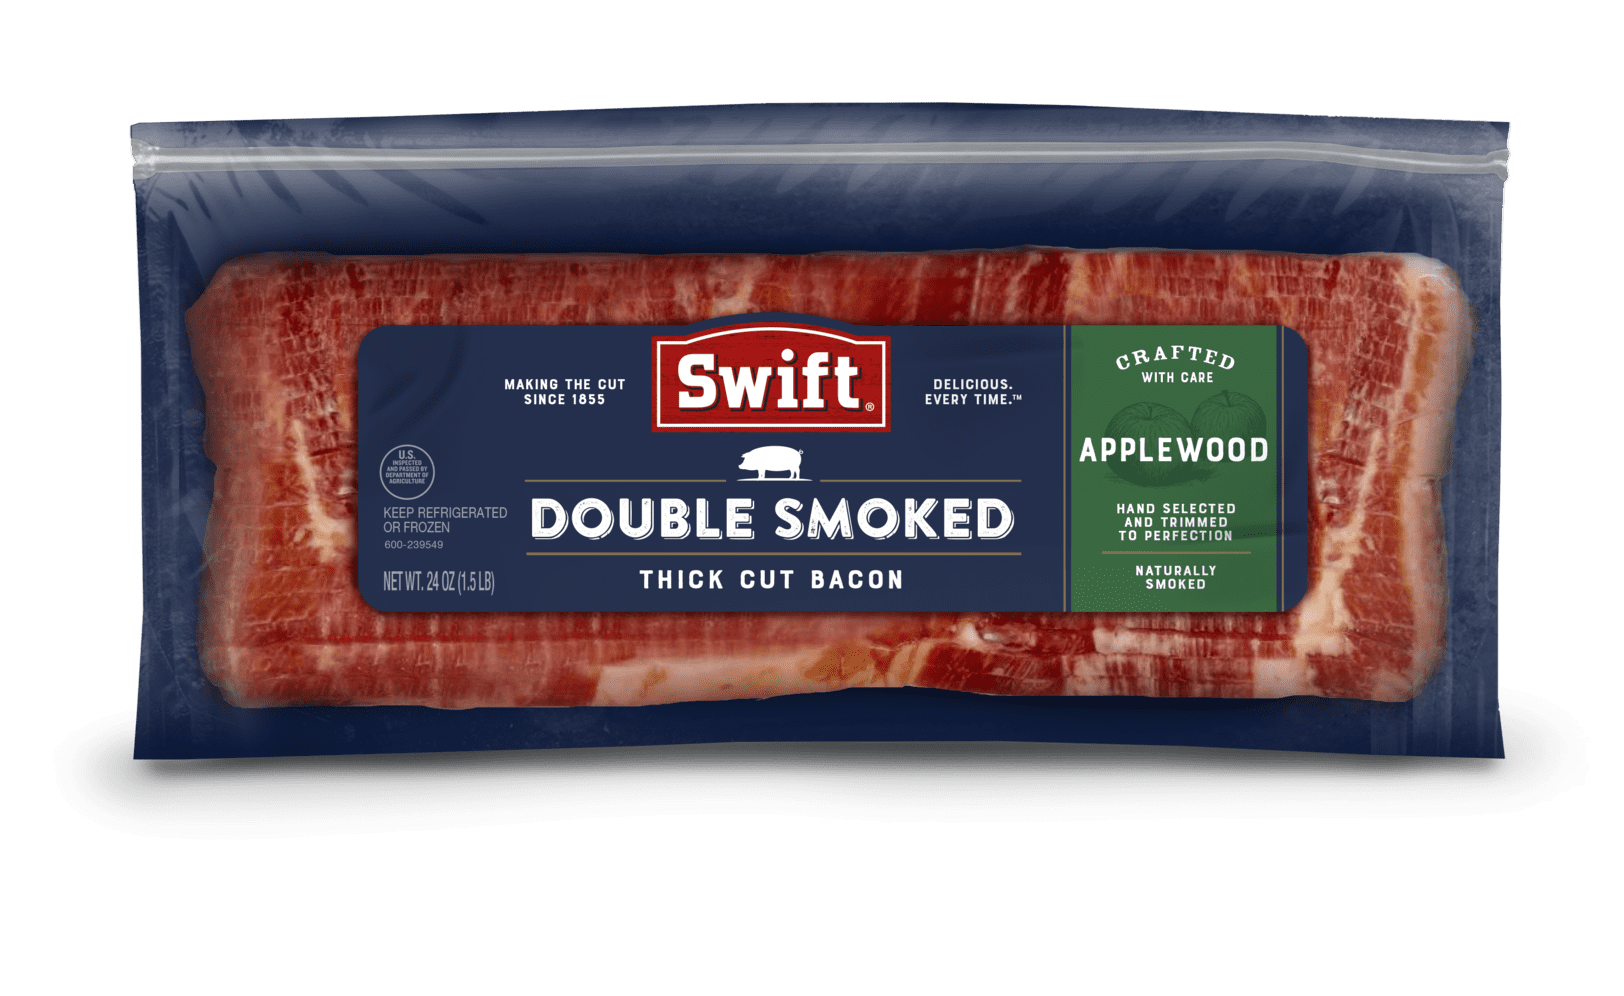 Applewood Double Smoked Thick Cut Bacon in packaging